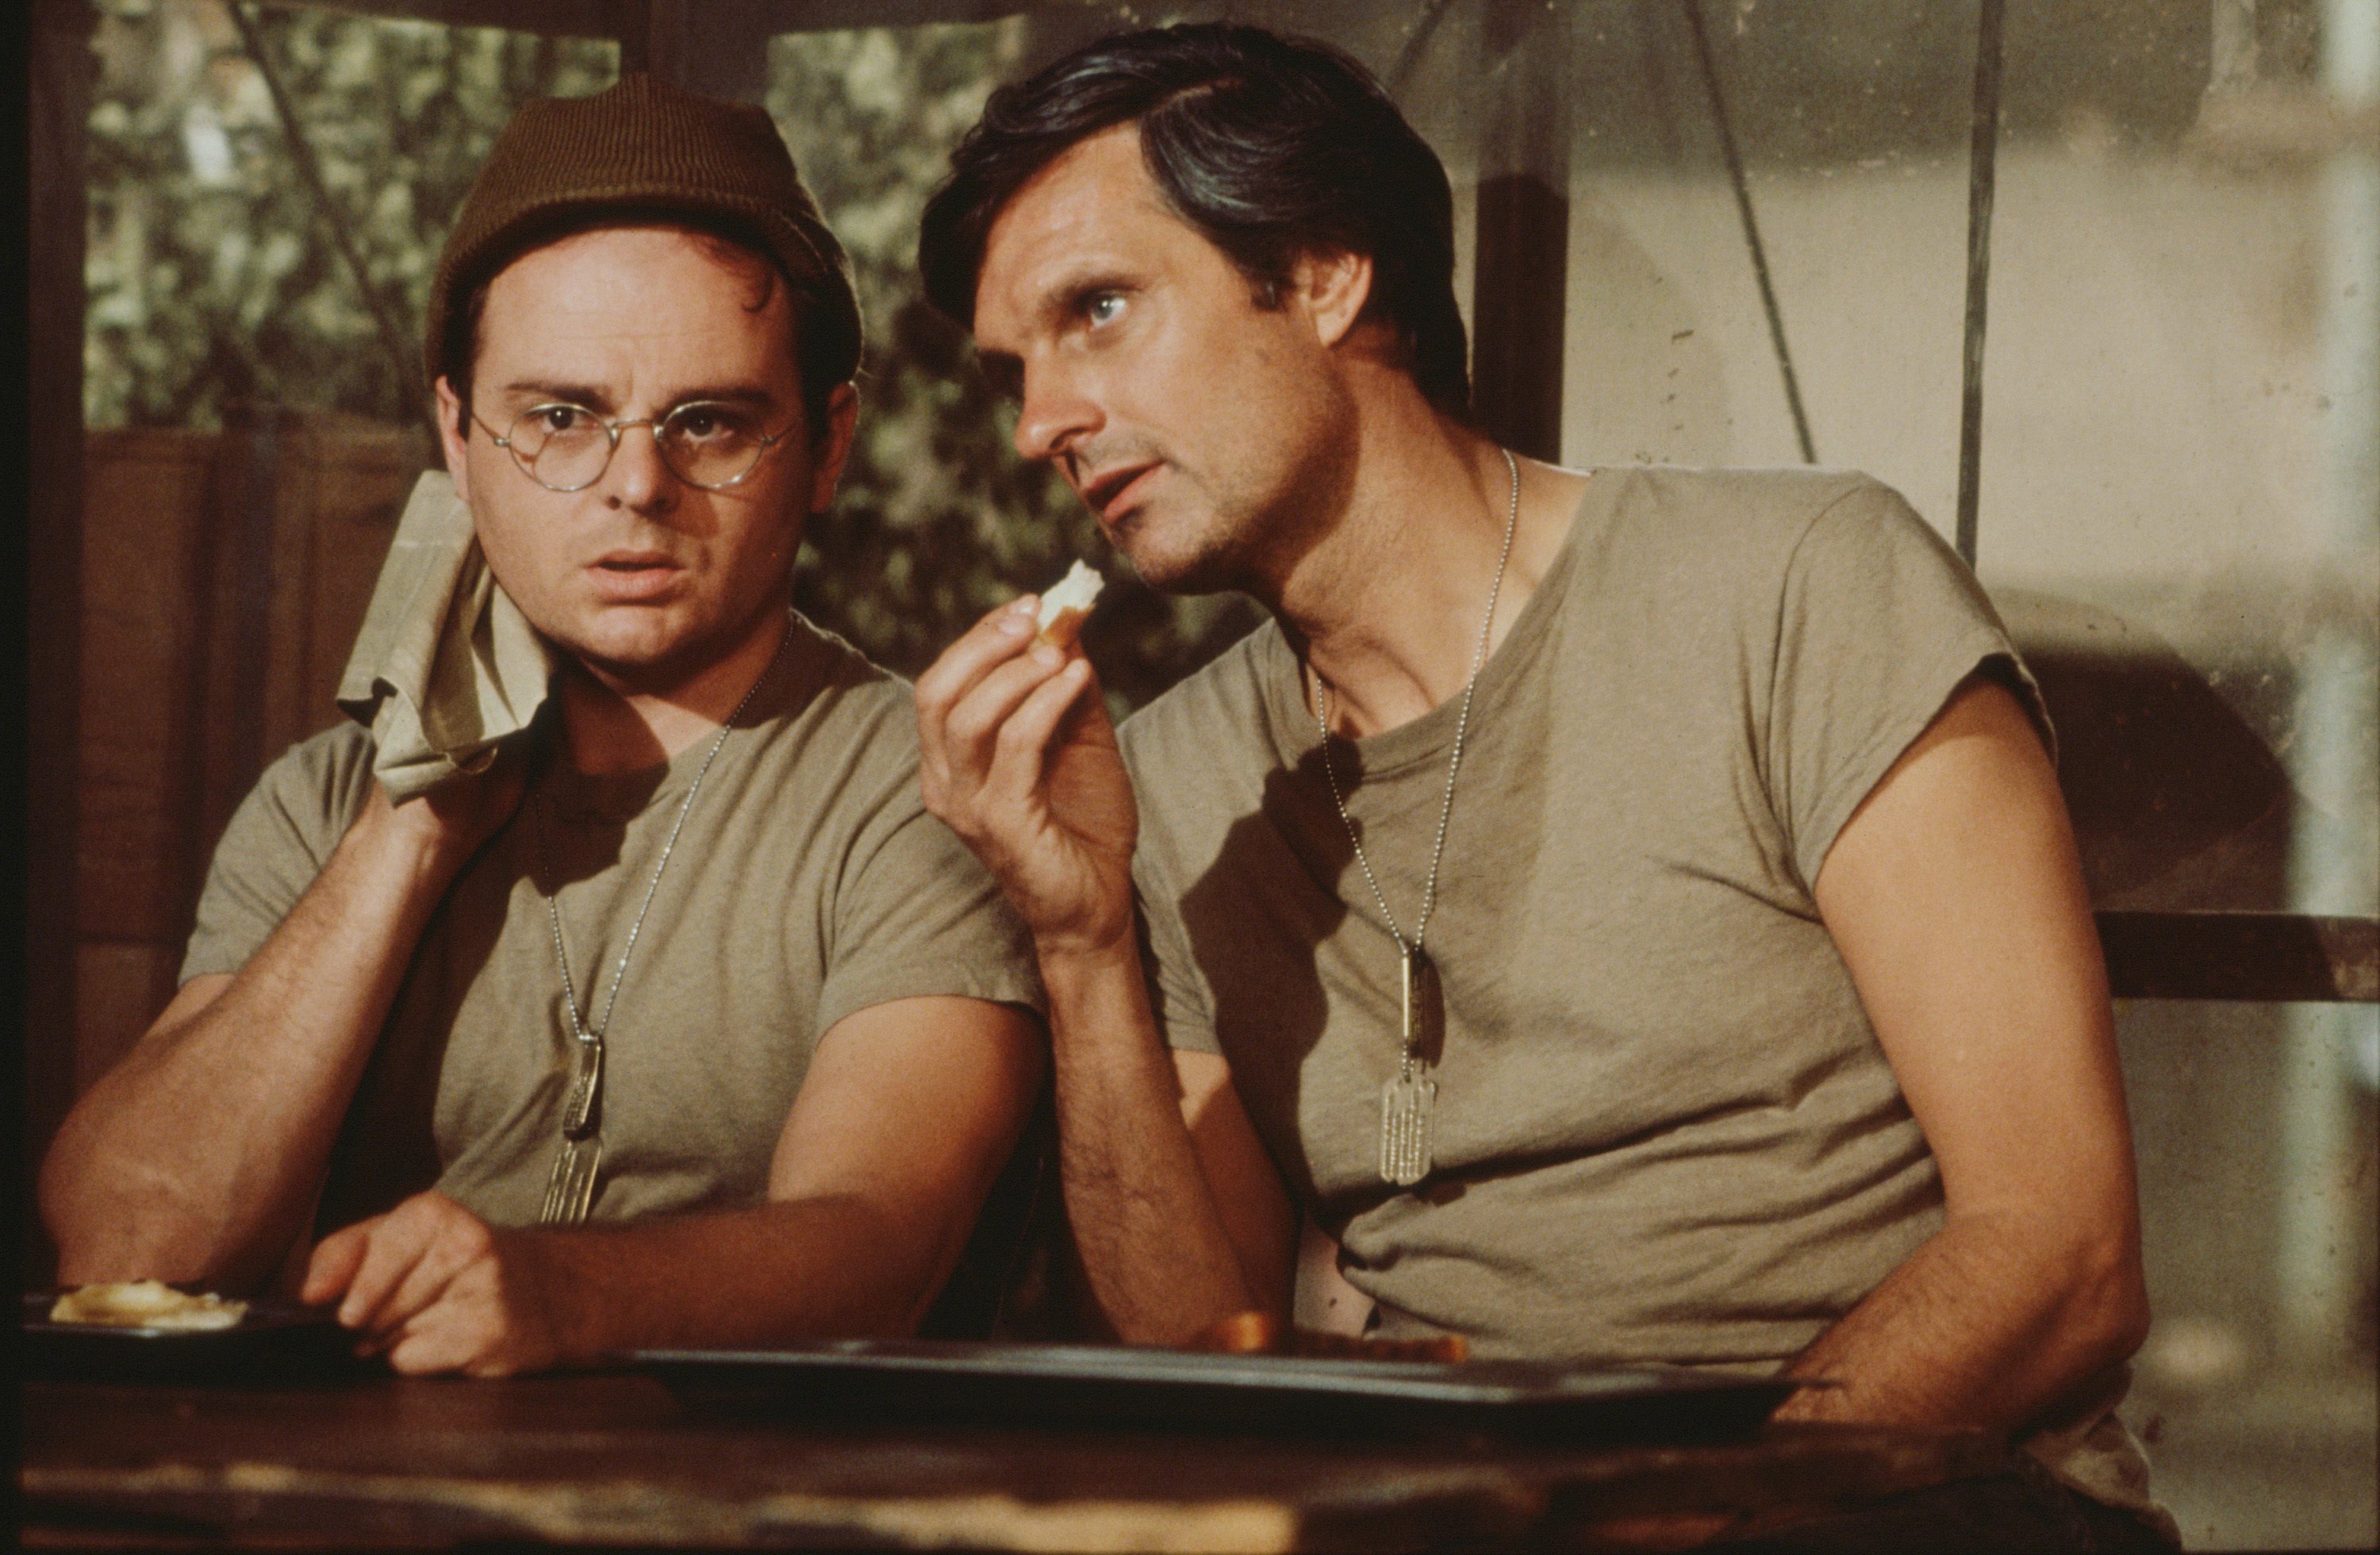 American actors Gary Burghoff (left), as Corporal Walter Radar O'Reilly, and Alan Alda, as Captain Benjamin Hawekeye Pierce, appear in a scene from an episode of the television series 'MASH,' California, 1976. | Source: Getty Images